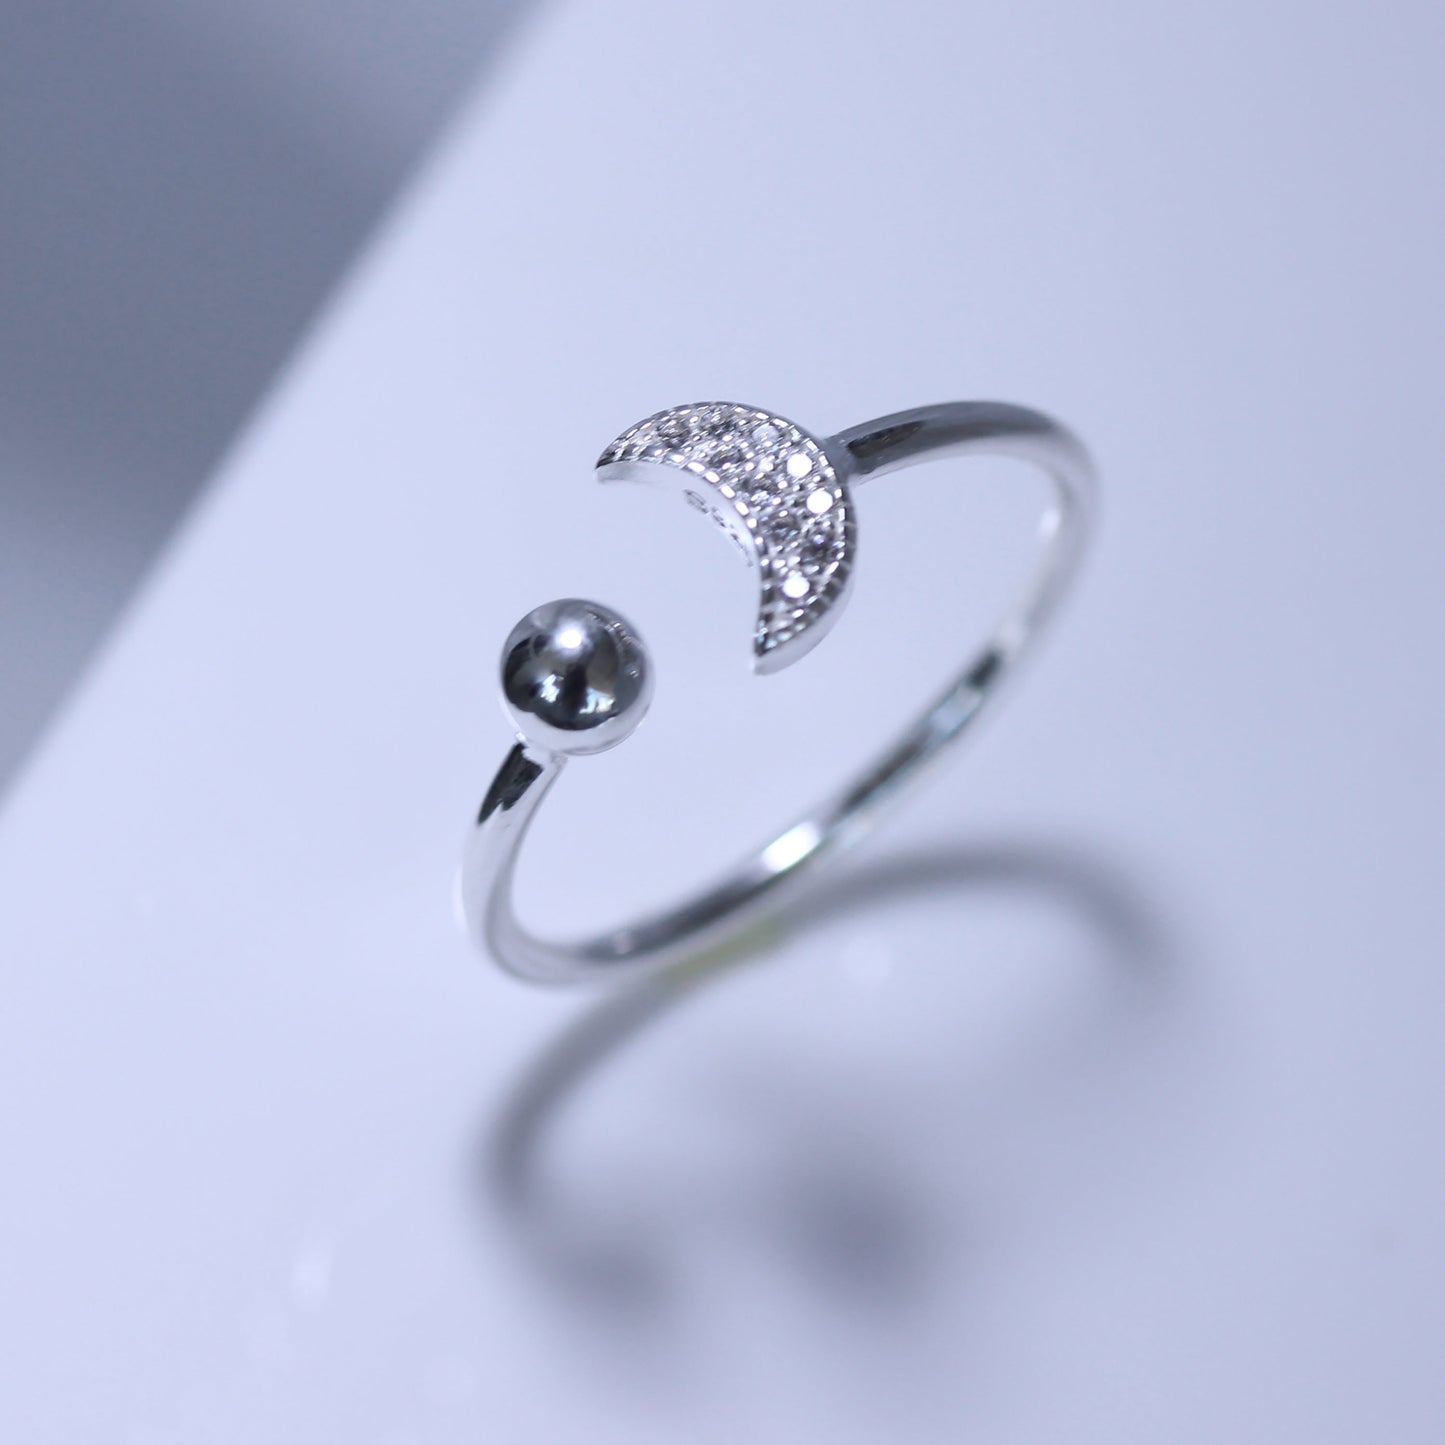 Sterling Silver & CZ Crescent Moon Adjustable Ring